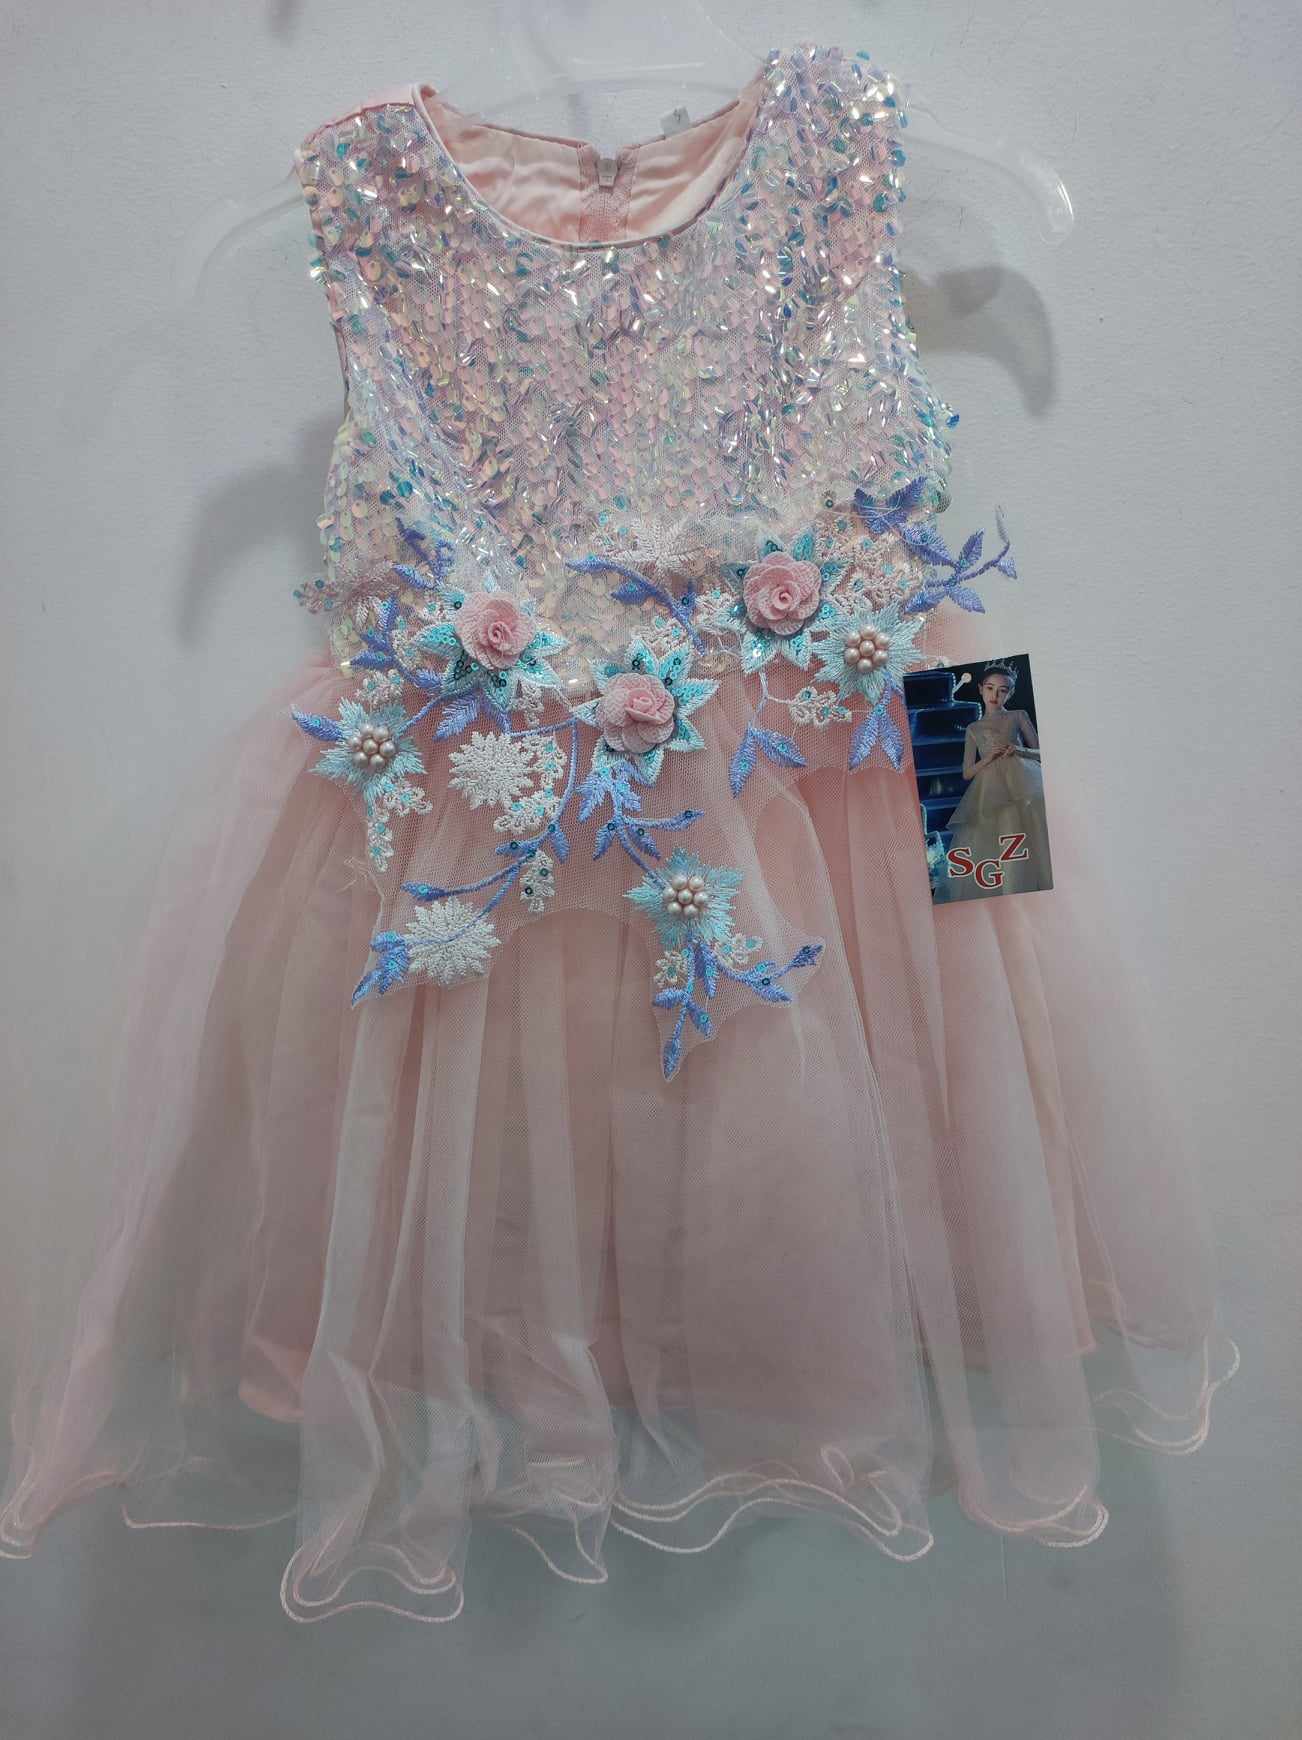 DRESS ITALY 23/24 MONOC. WITH SEQUINS AND FLOWERS